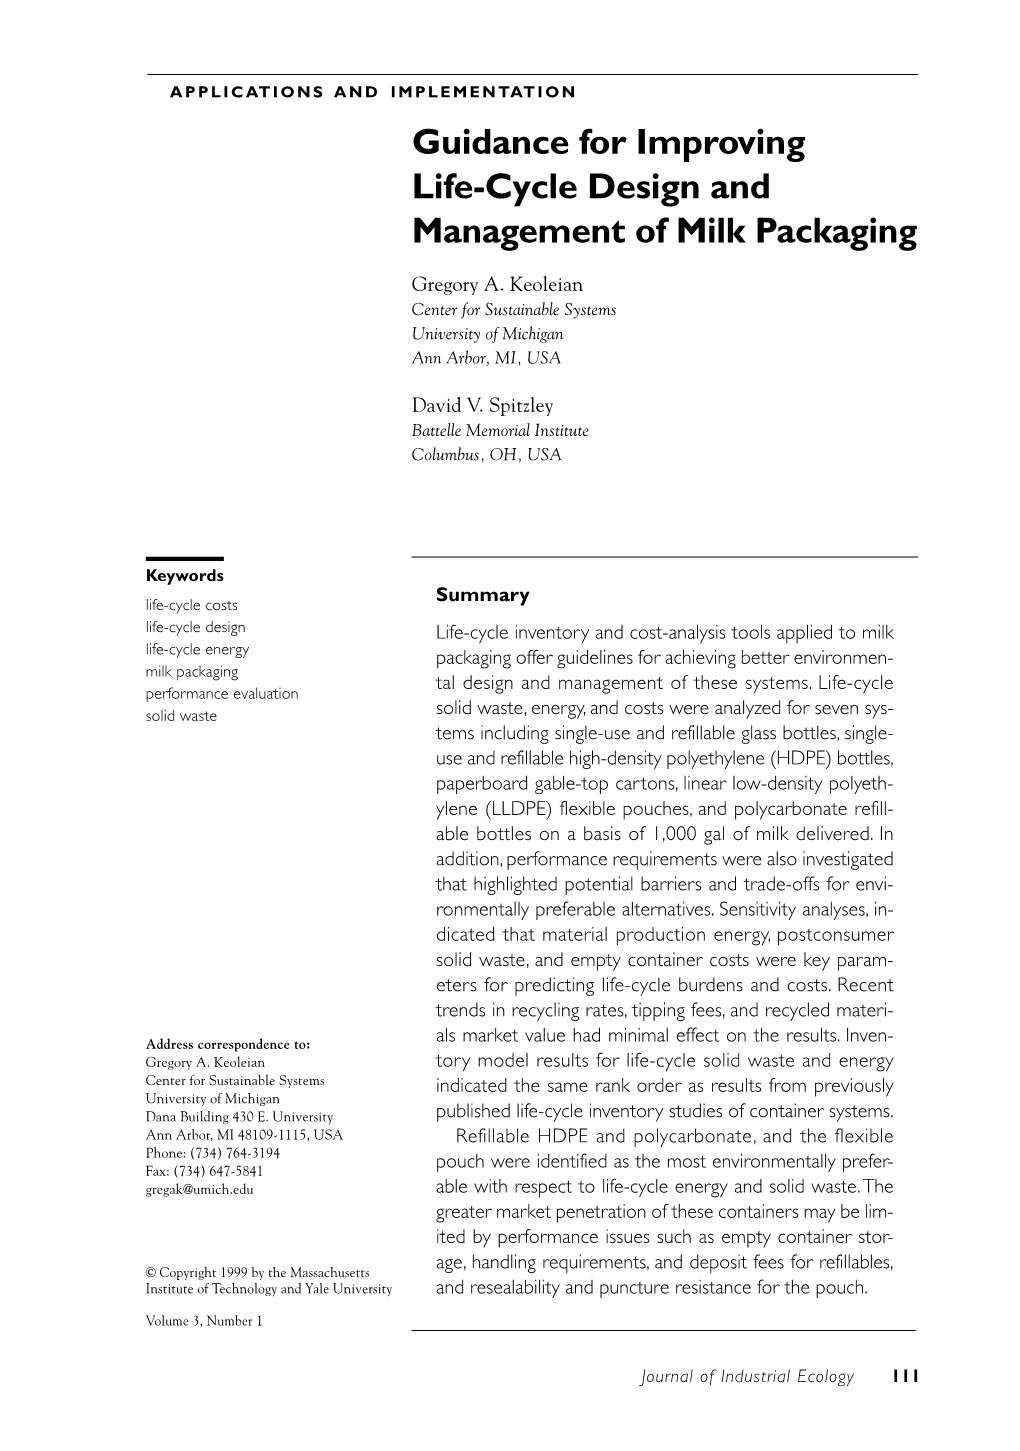 Guidance for Improving Life-Cycle Design and Management of Milk Packaging